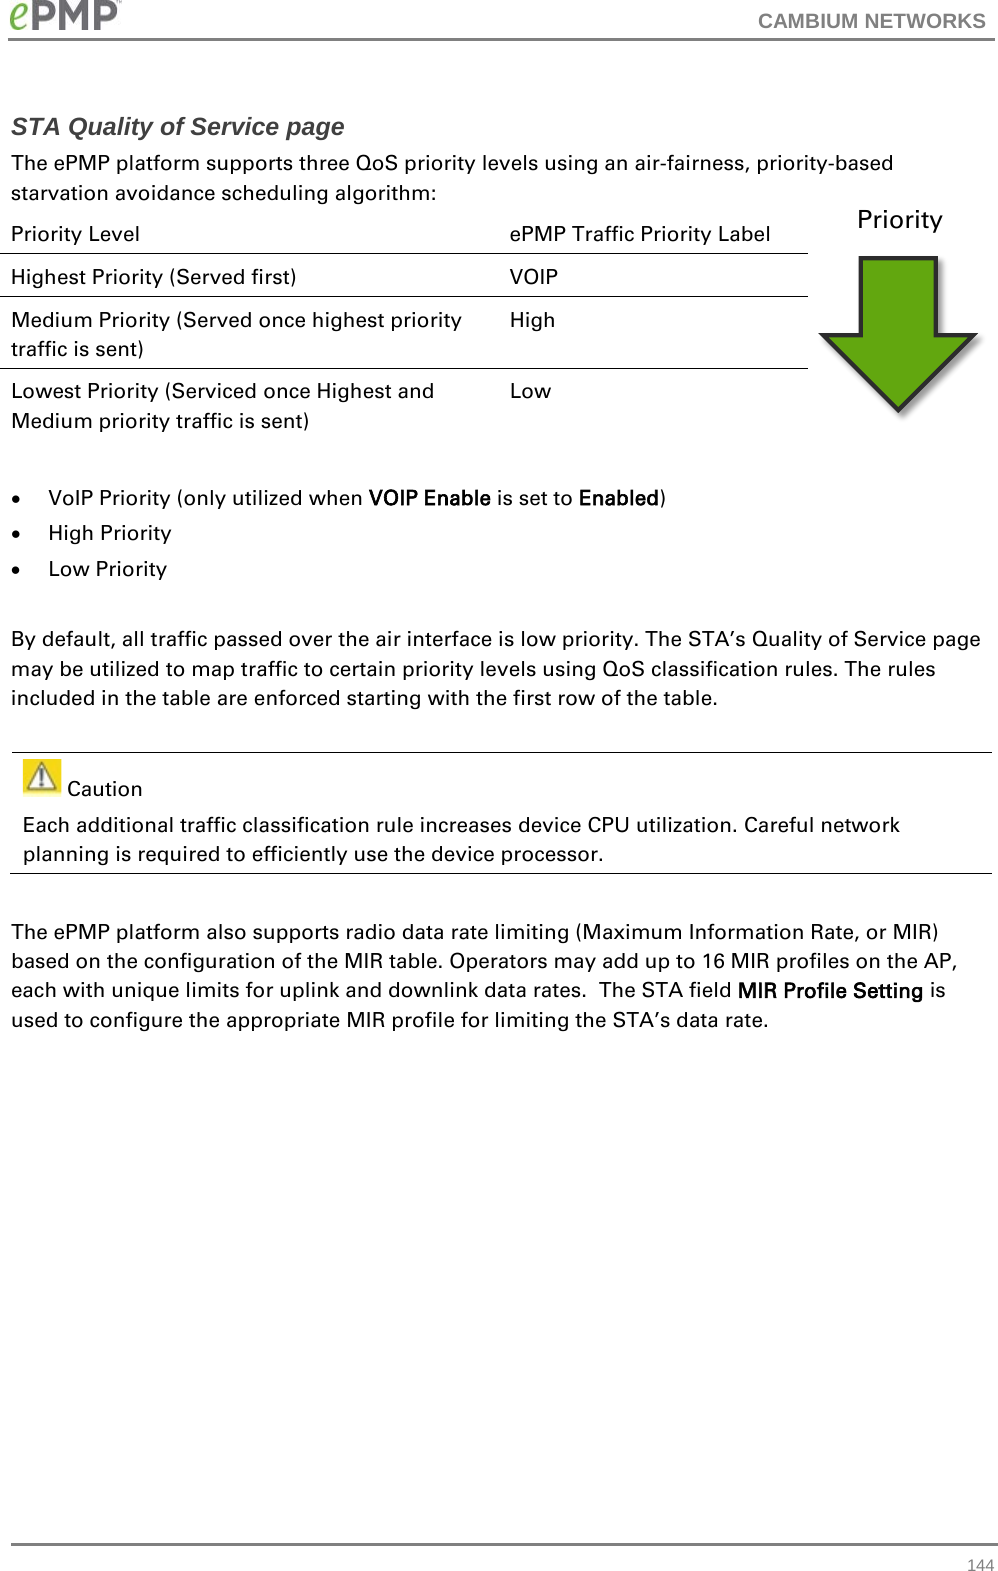 CAMBIUM NETWORKS  STA Quality of Service page The ePMP platform supports three QoS priority levels using an air-fairness, priority-based starvation avoidance scheduling algorithm: Priority Level ePMP Traffic Priority Label Highest Priority (Served first) VOIP Medium Priority (Served once highest priority traffic is sent) High Lowest Priority (Serviced once Highest and Medium priority traffic is sent) Low  • VoIP Priority (only utilized when VOIP Enable is set to Enabled) • High Priority • Low Priority  By default, all traffic passed over the air interface is low priority. The STA’s Quality of Service page may be utilized to map traffic to certain priority levels using QoS classification rules. The rules included in the table are enforced starting with the first row of the table.      Caution Each additional traffic classification rule increases device CPU utilization. Careful network planning is required to efficiently use the device processor.  The ePMP platform also supports radio data rate limiting (Maximum Information Rate, or MIR) based on the configuration of the MIR table. Operators may add up to 16 MIR profiles on the AP, each with unique limits for uplink and downlink data rates.  The STA field MIR Profile Setting is used to configure the appropriate MIR profile for limiting the STA’s data rate.   Priority  144 